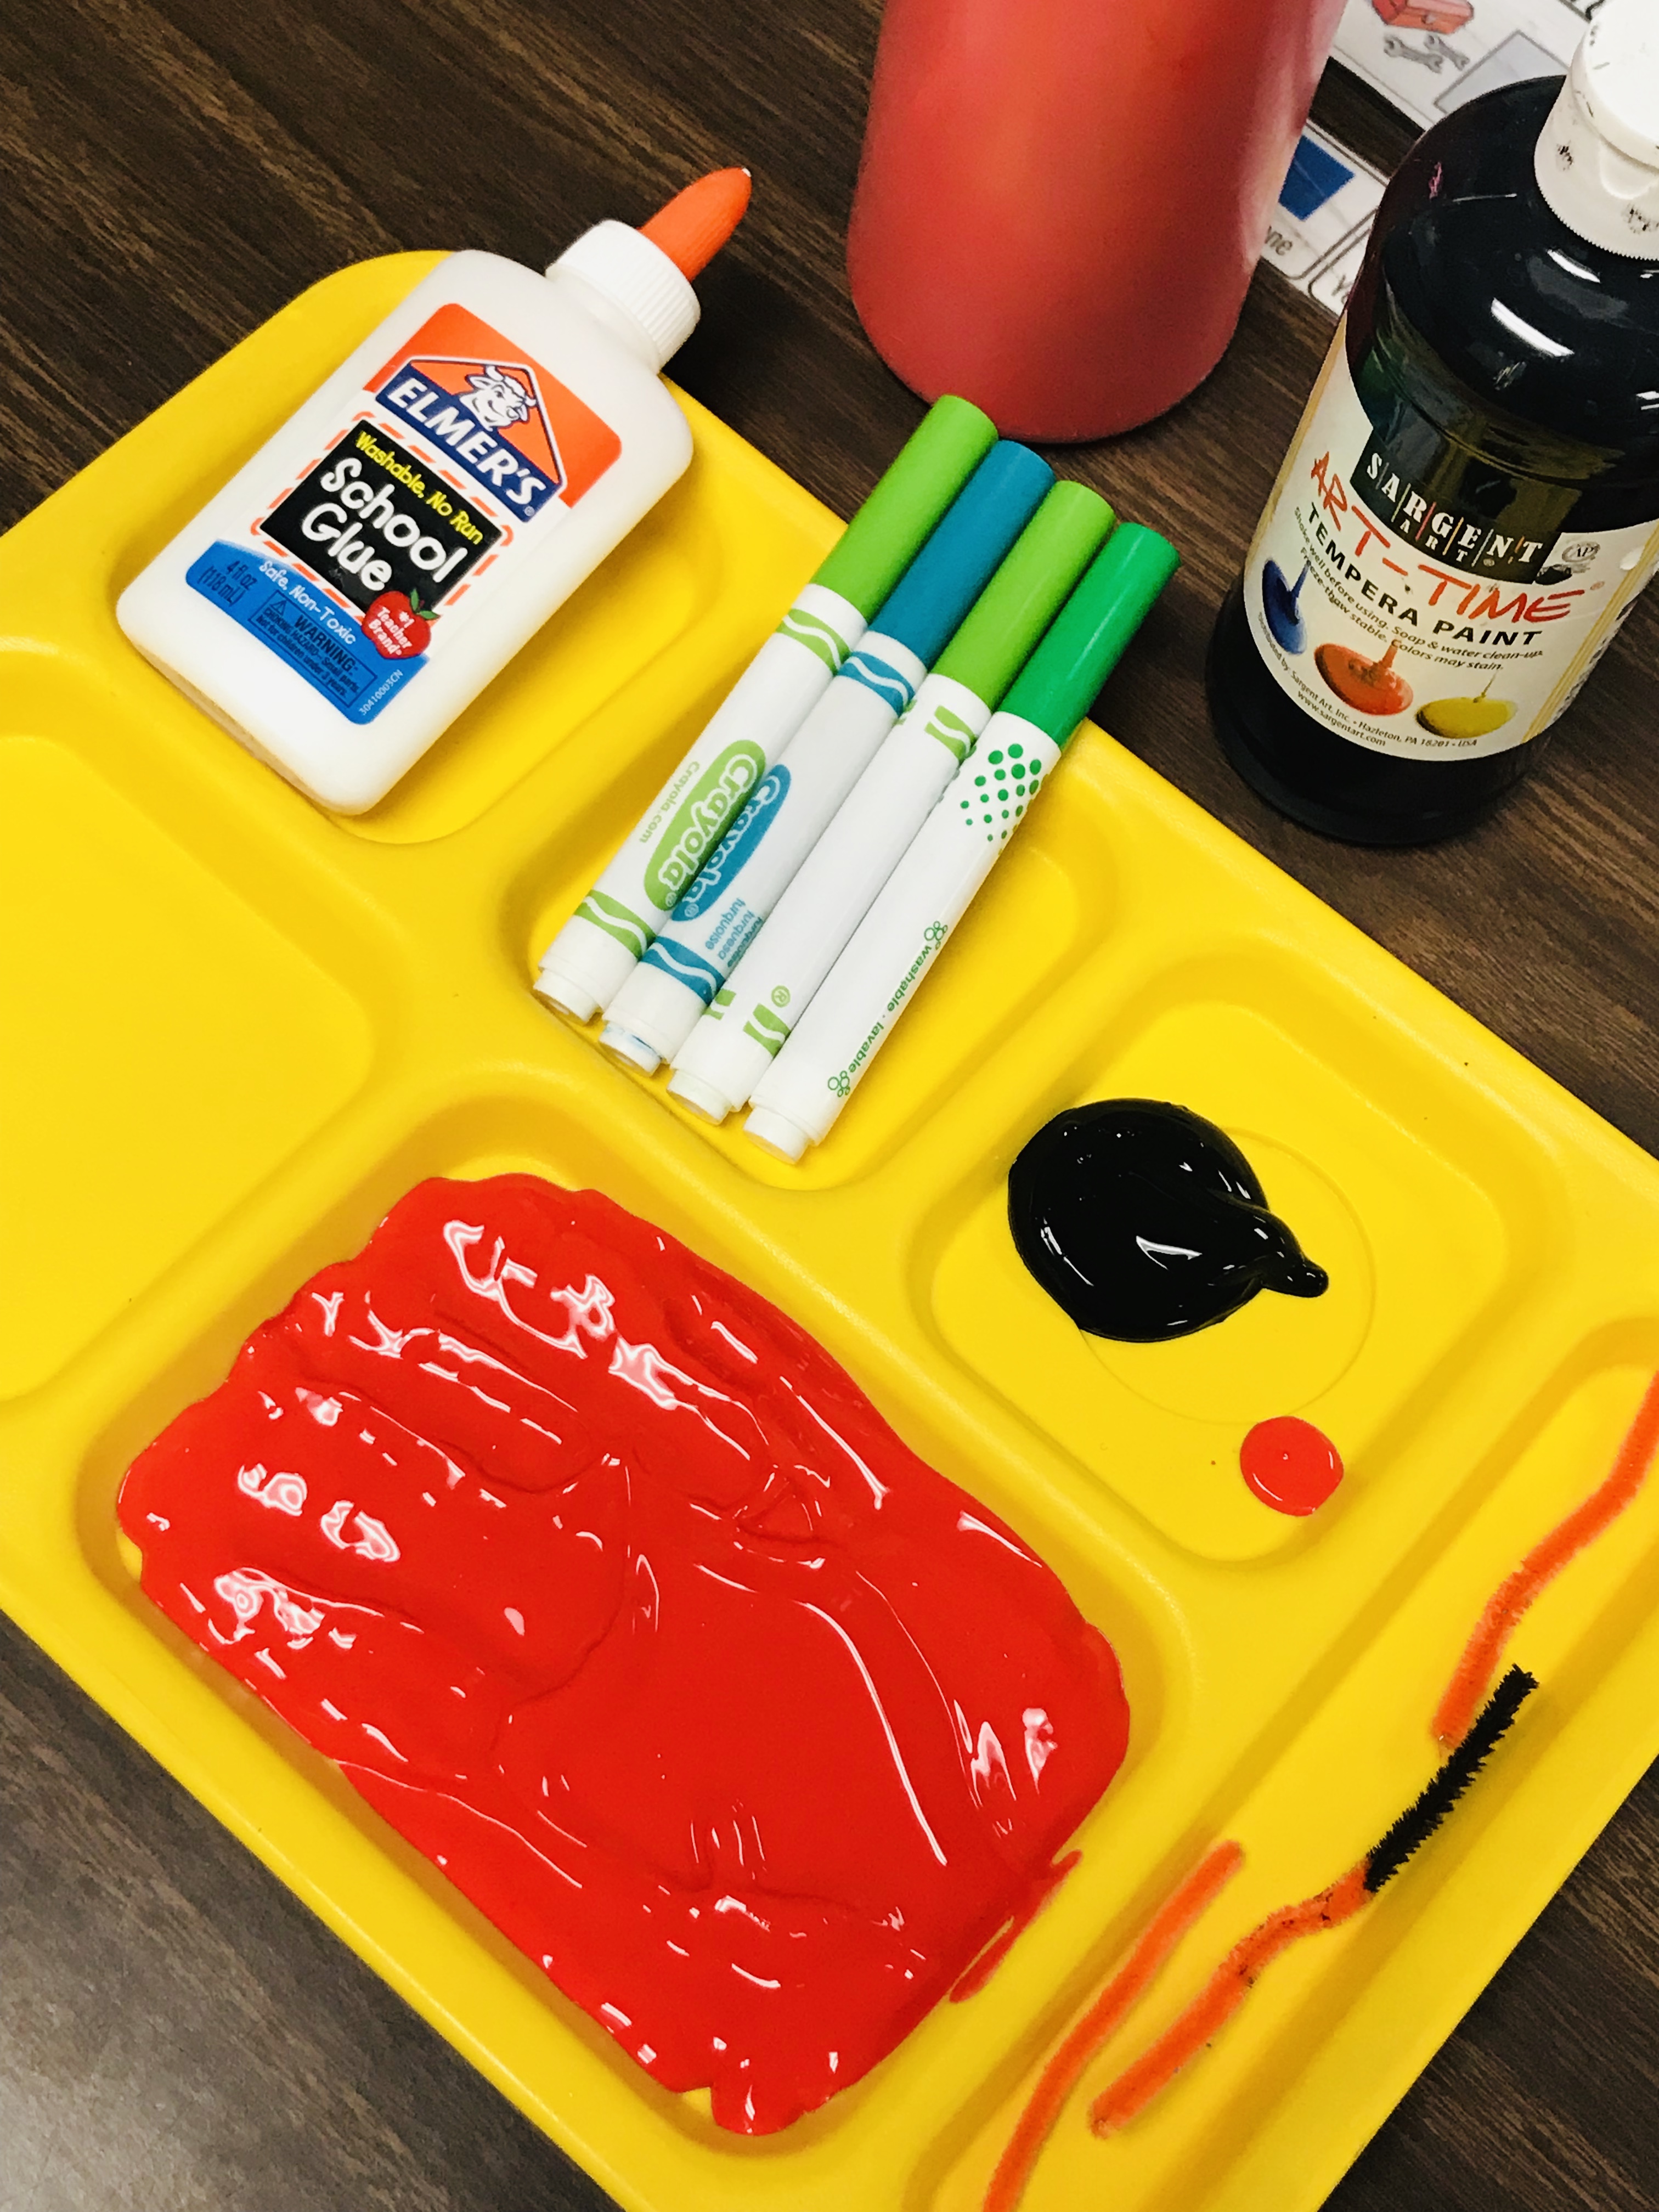 Food tray containing paint, markers and glue